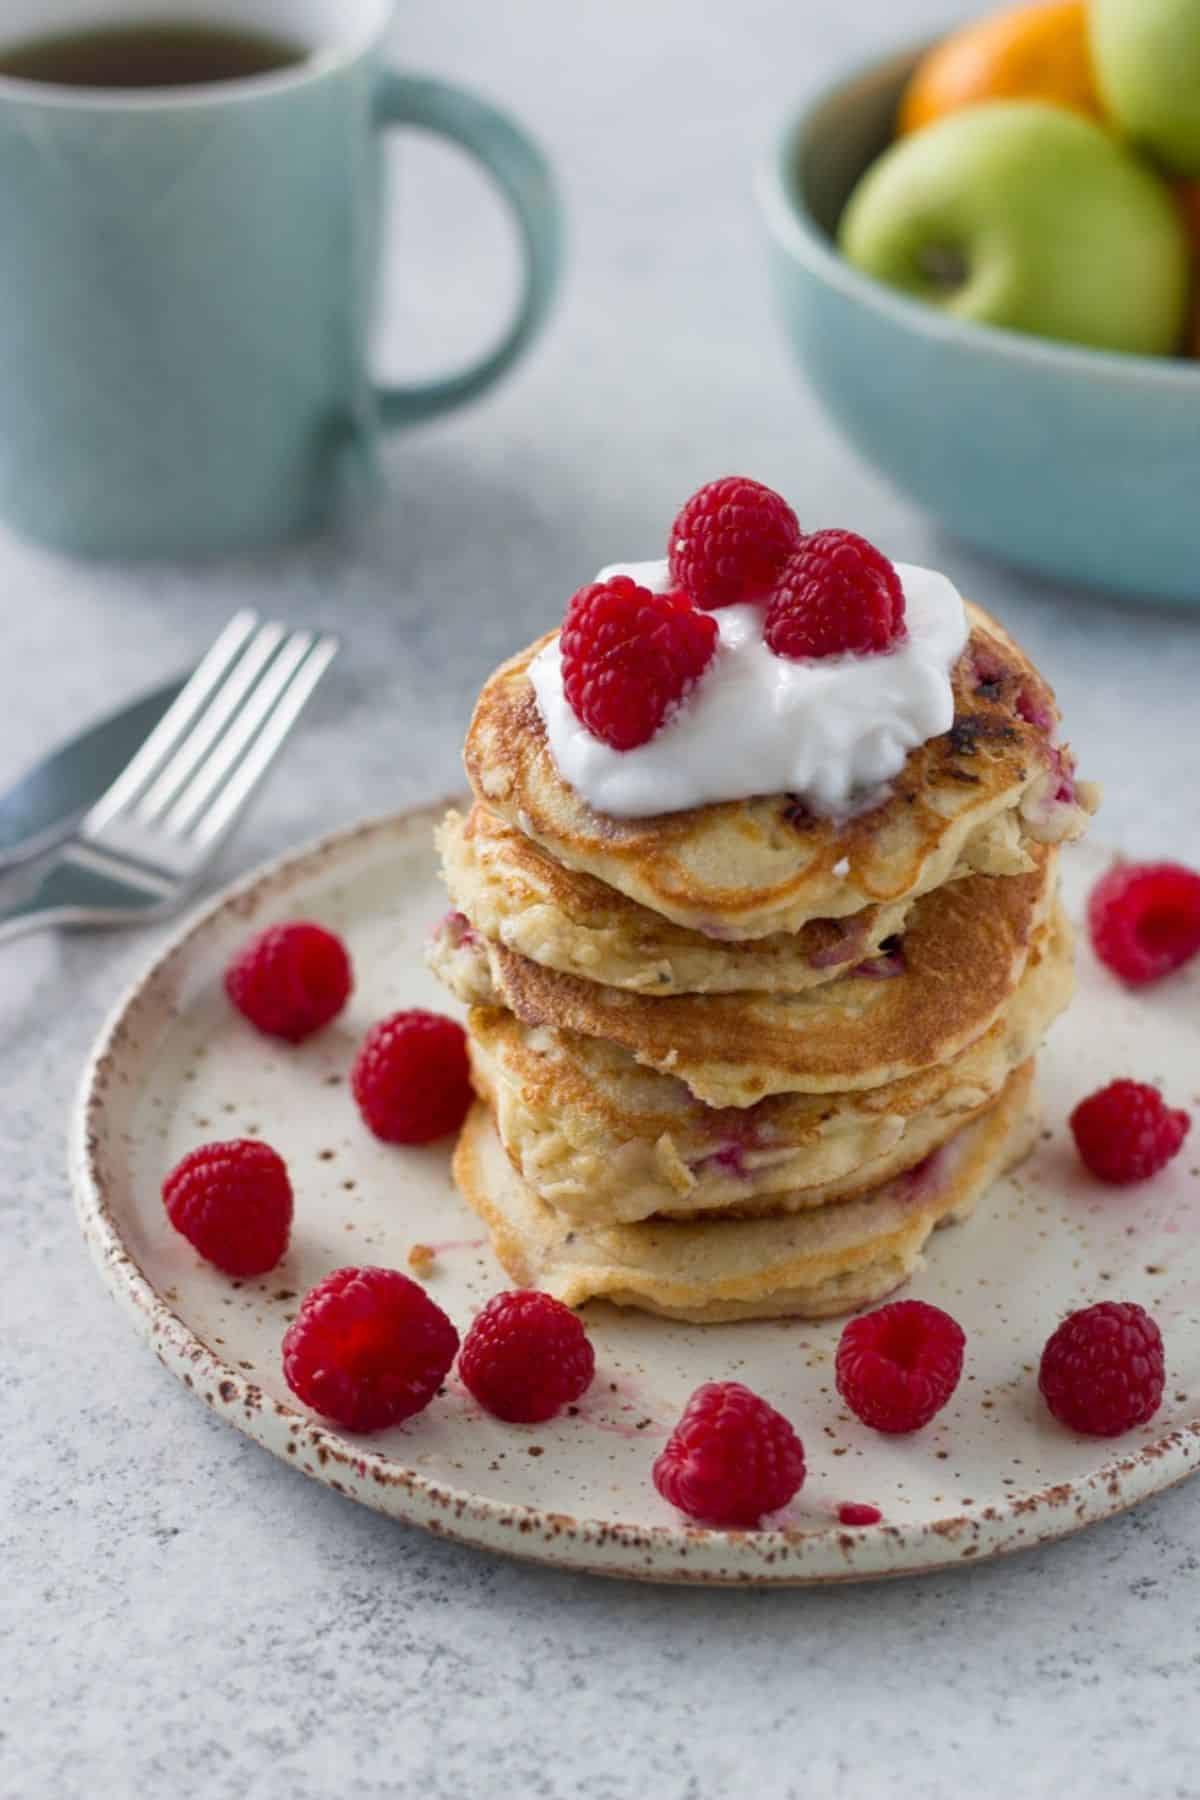 A big stack of raspberry pancakes on a plate with a cup of tea and bowl of fruit behind it.